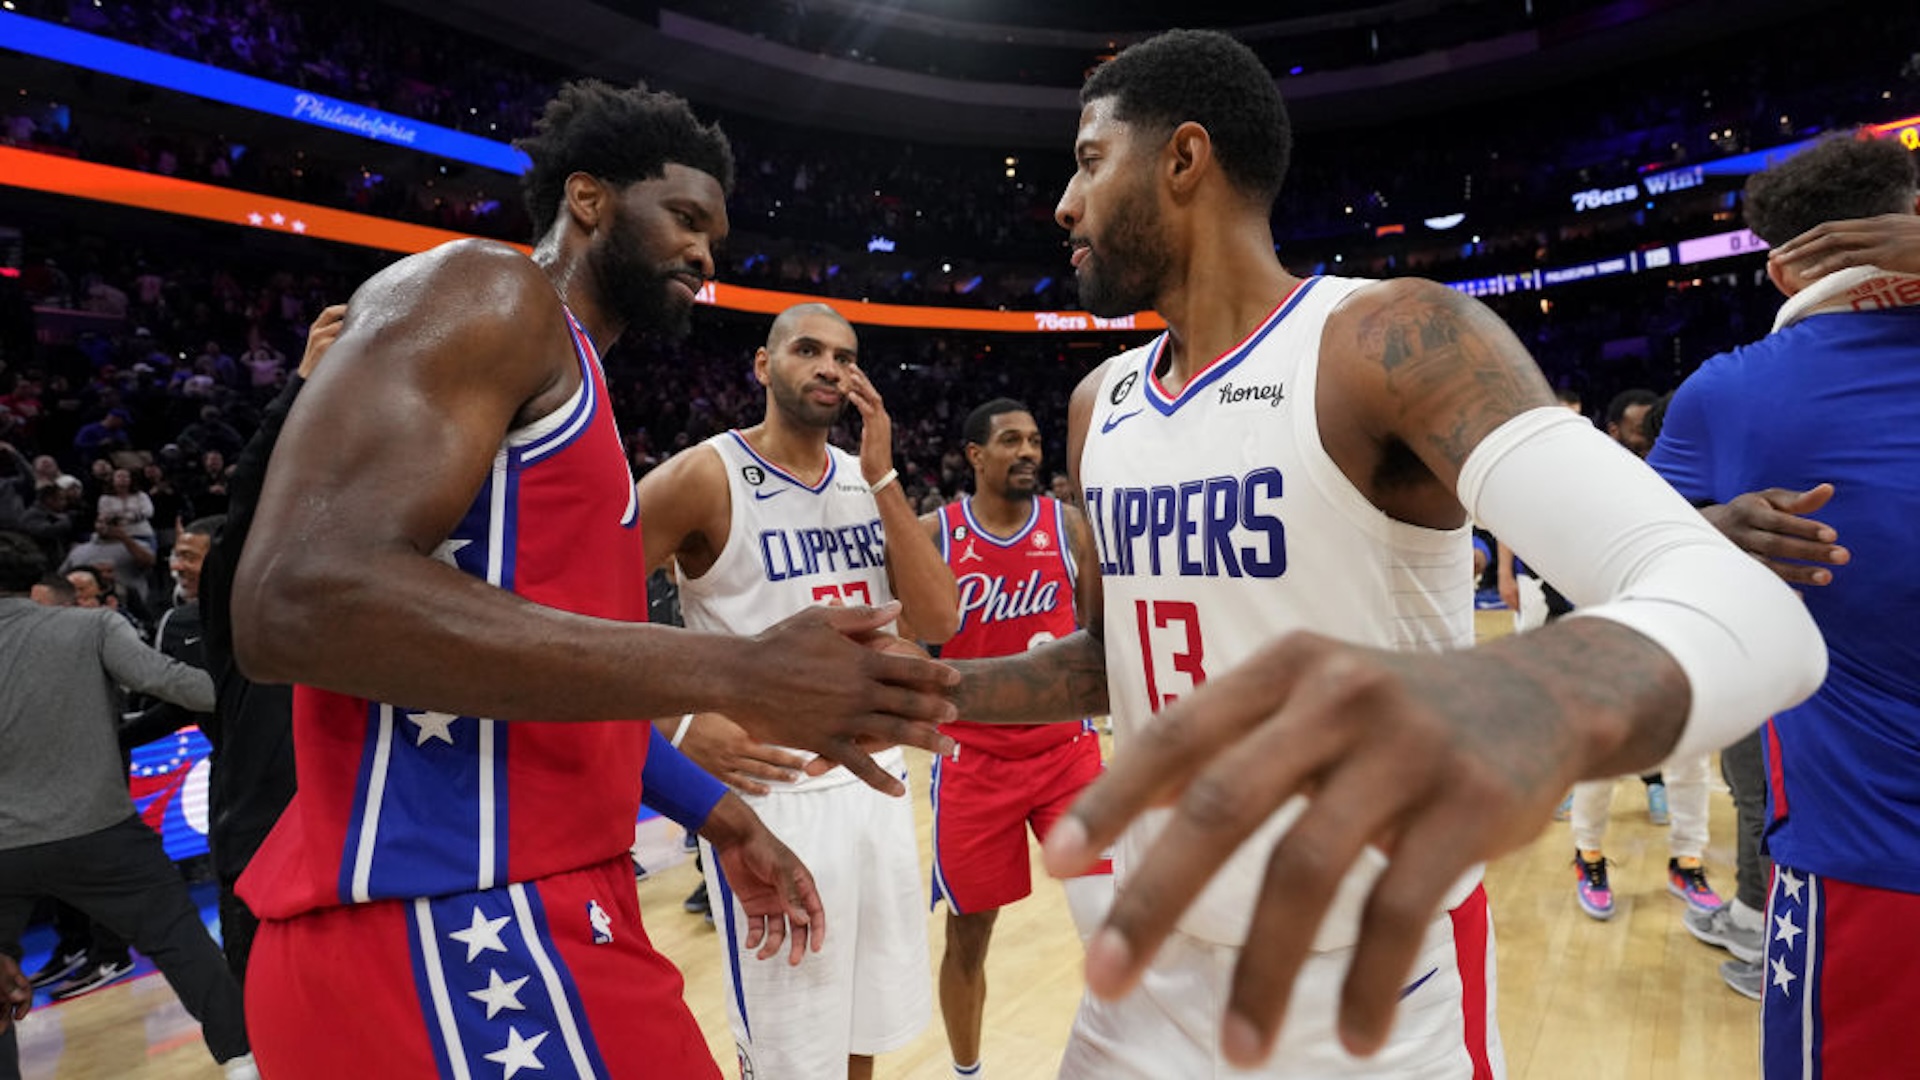 Joel Embiid #21 of the Philadelphia 76ers high fives Paul George #13 of the LA Clippers after the game on December 23, 2022 at the Wells Fargo Center in Philadelphia, Pennsylvania